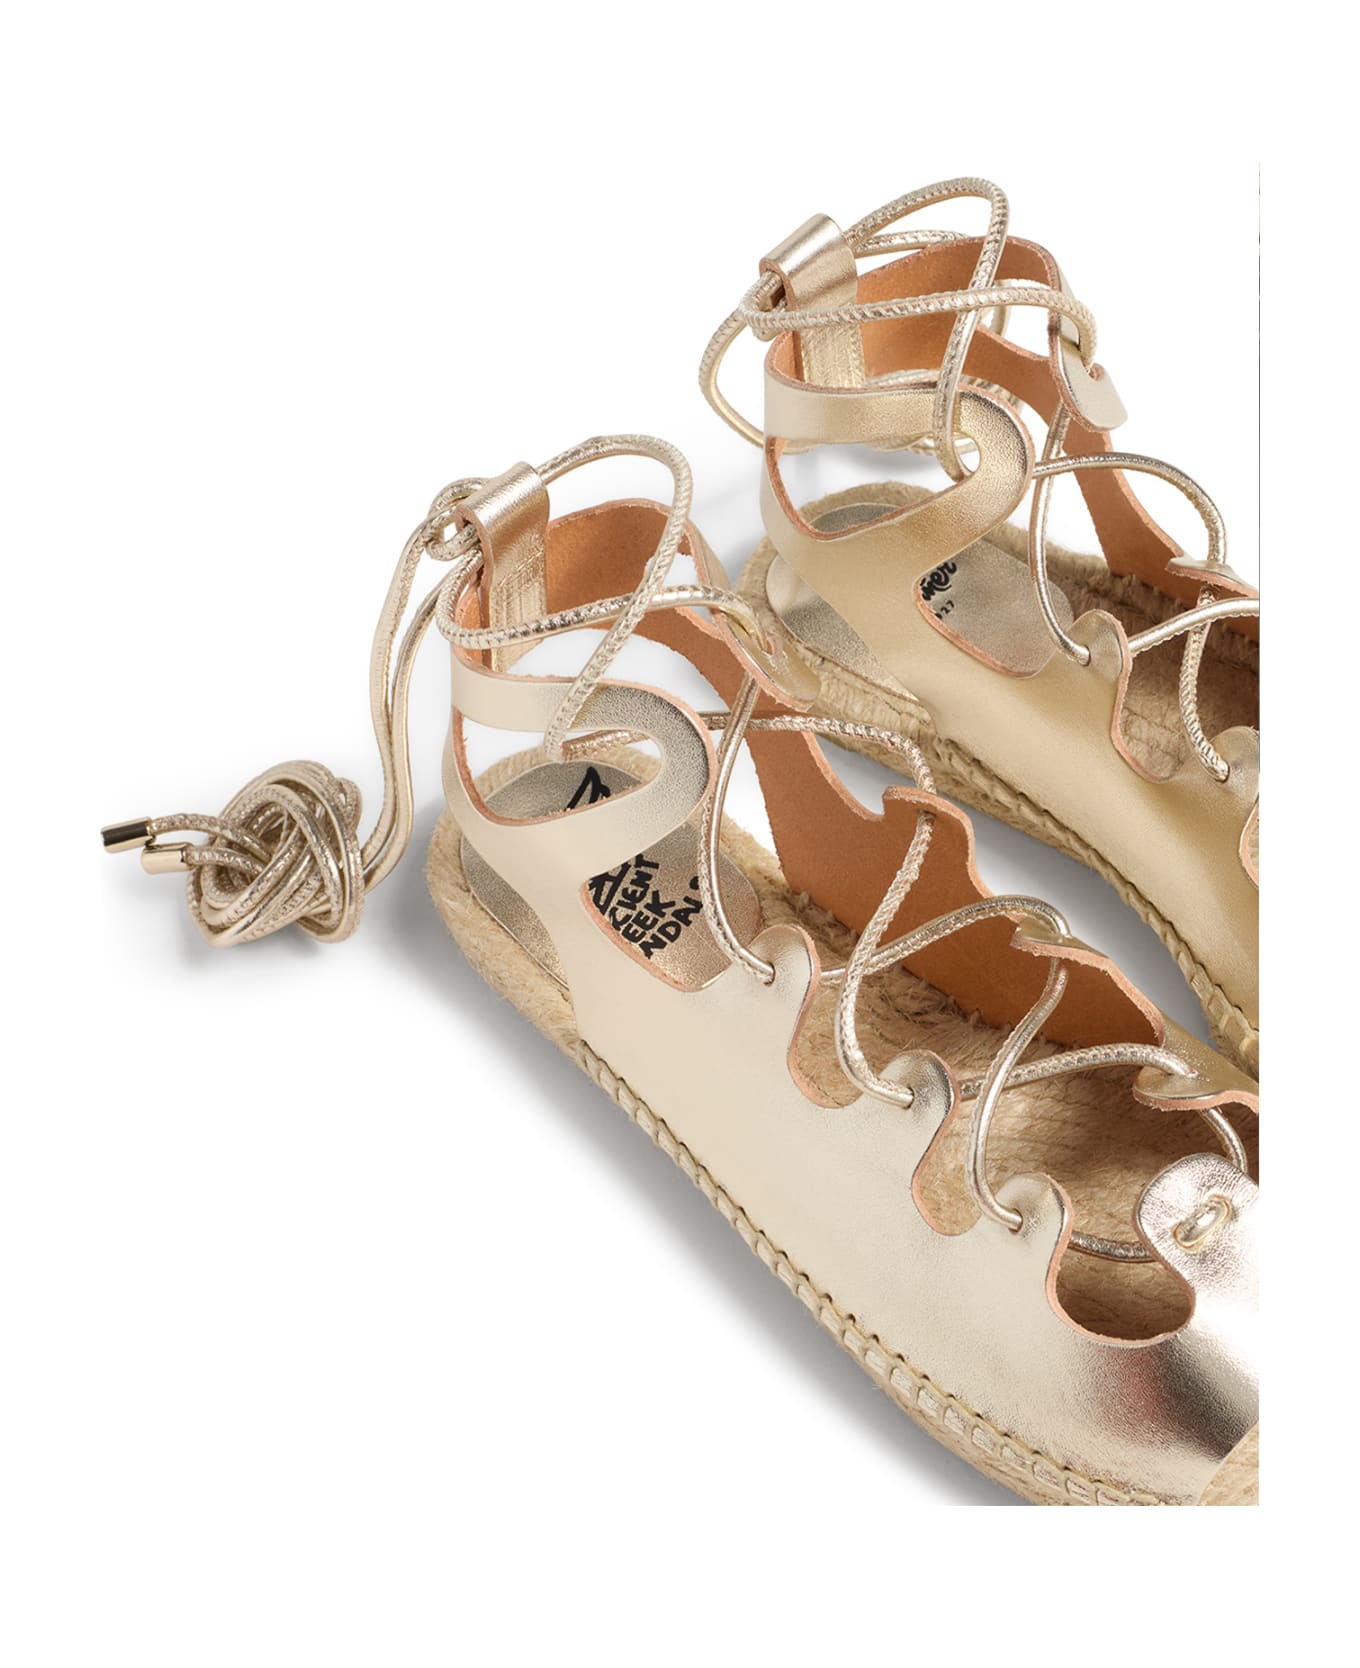 Castañer Laminated Leather Sandals With Laces - PLATINO サンダル